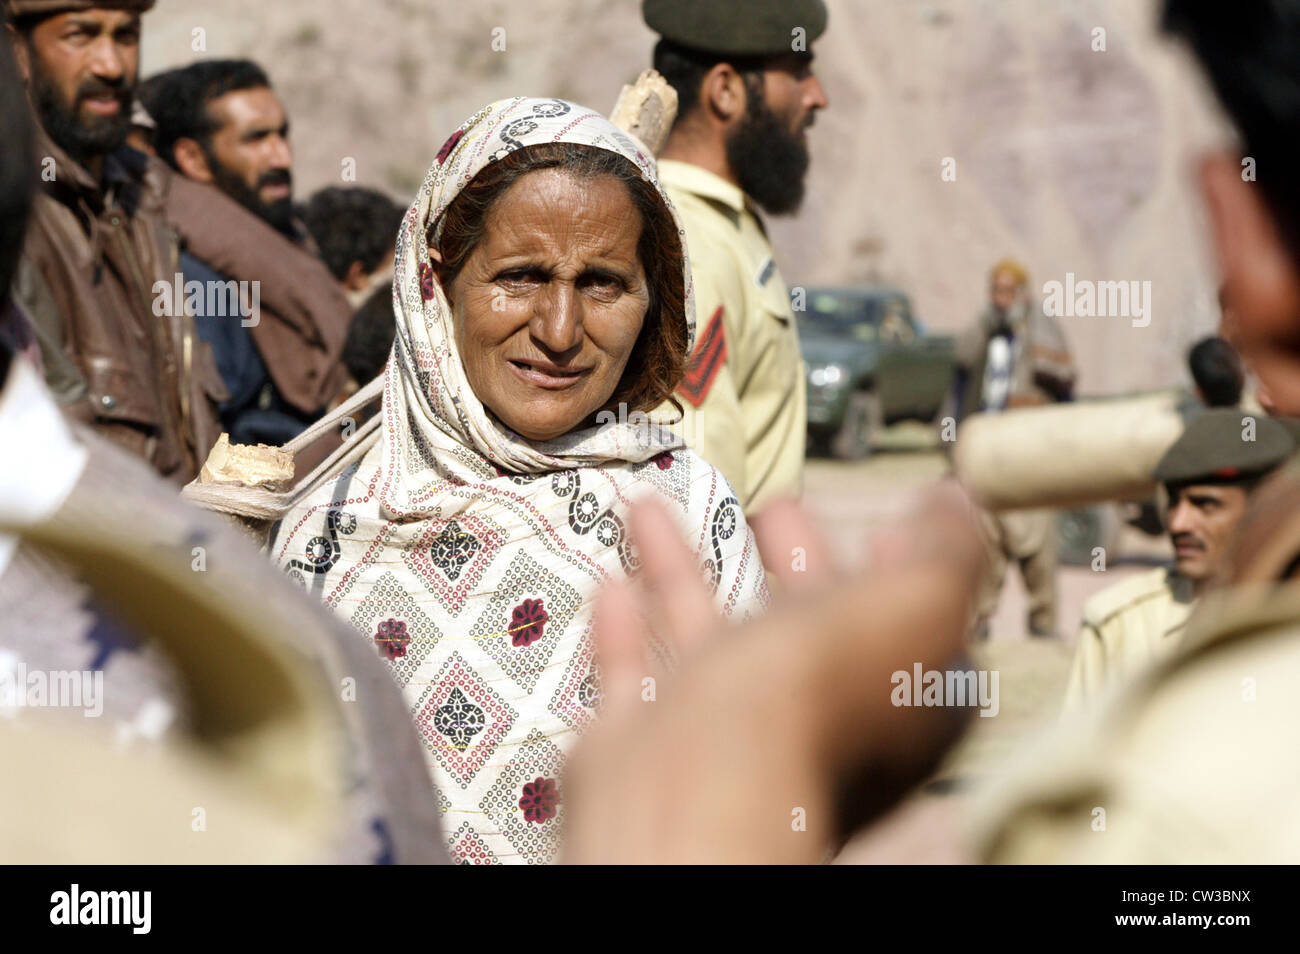 Hilfsgueterverteilung to earthquake victims in Pakistan Stock Photo